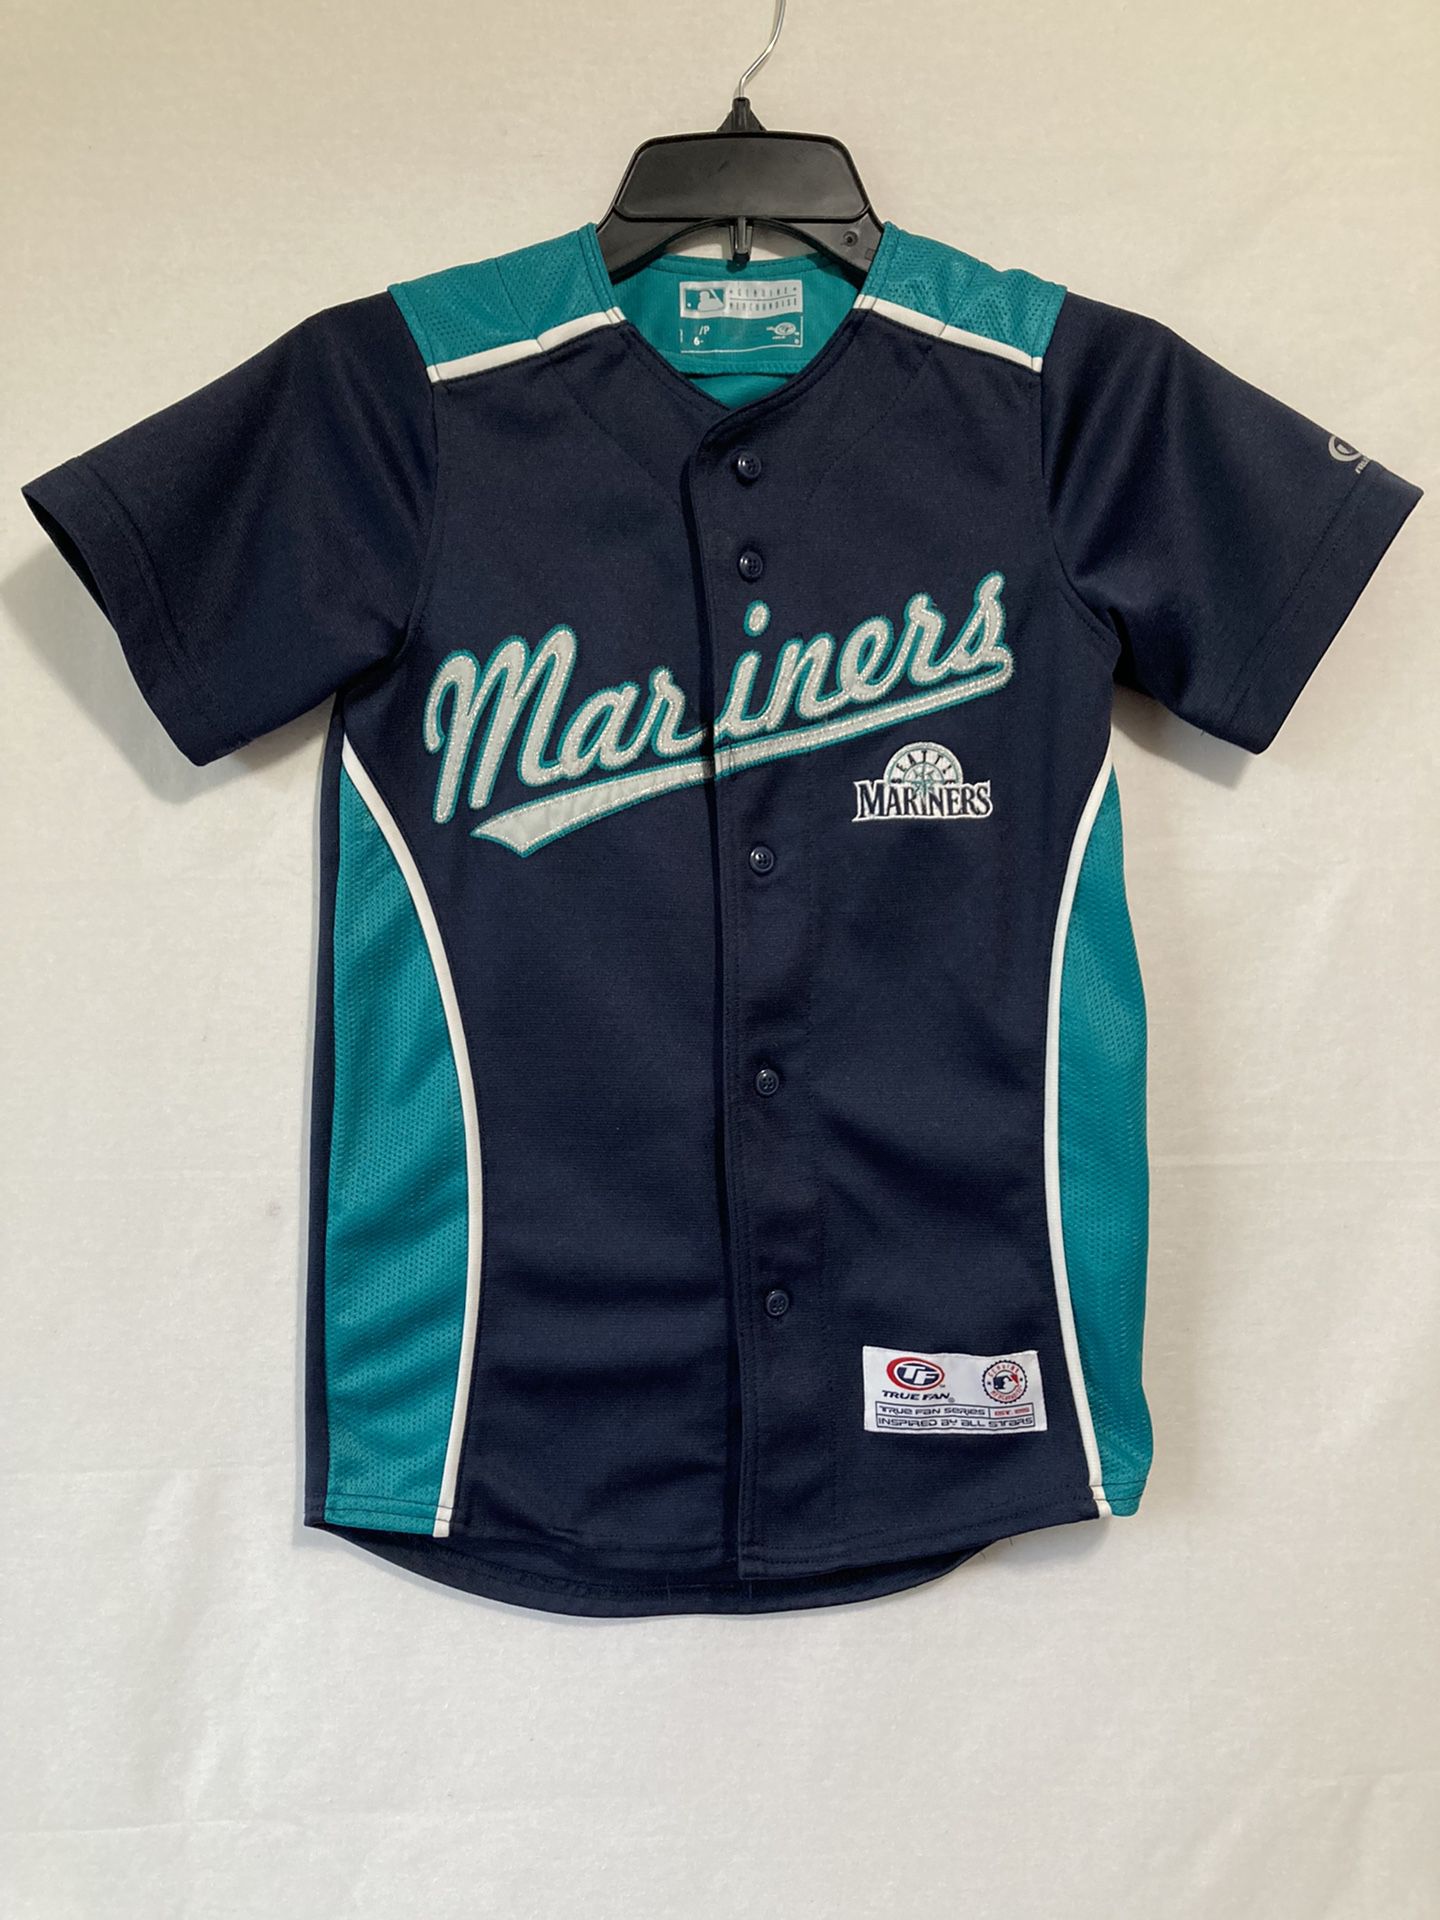 Genuine Merchandise Seattle Mariners Baseball Jersey True Fan Sz Small 6/7 Kids. Embroidered Name, Beautiful jersey for kids  Pre owned, wasn’t worn m